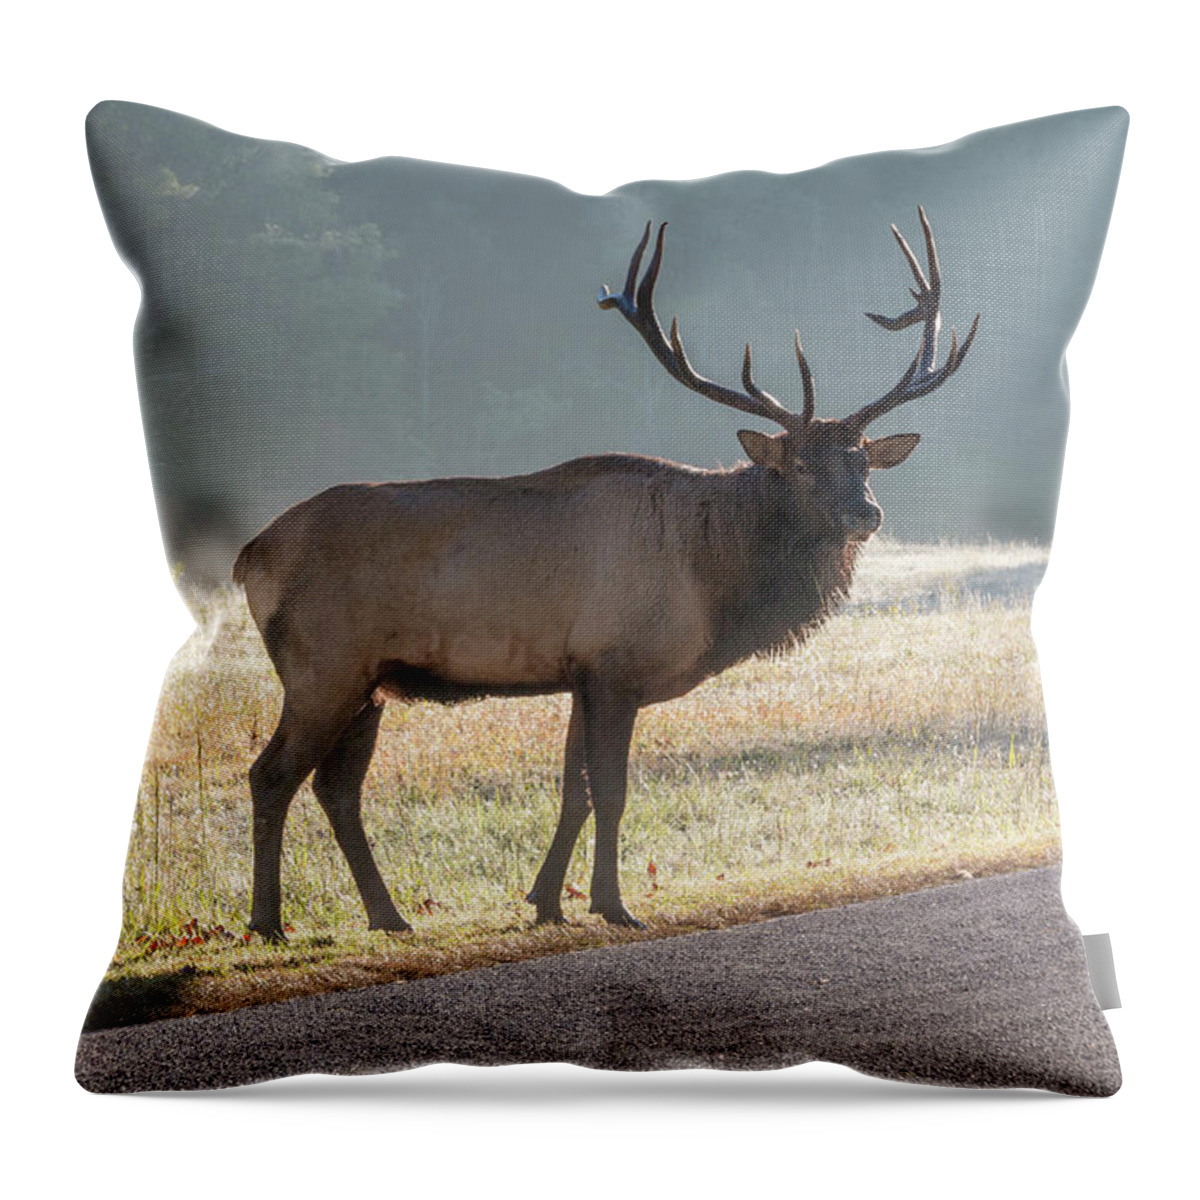 Bull Throw Pillow featuring the photograph Bull Elk Watching by D K Wall